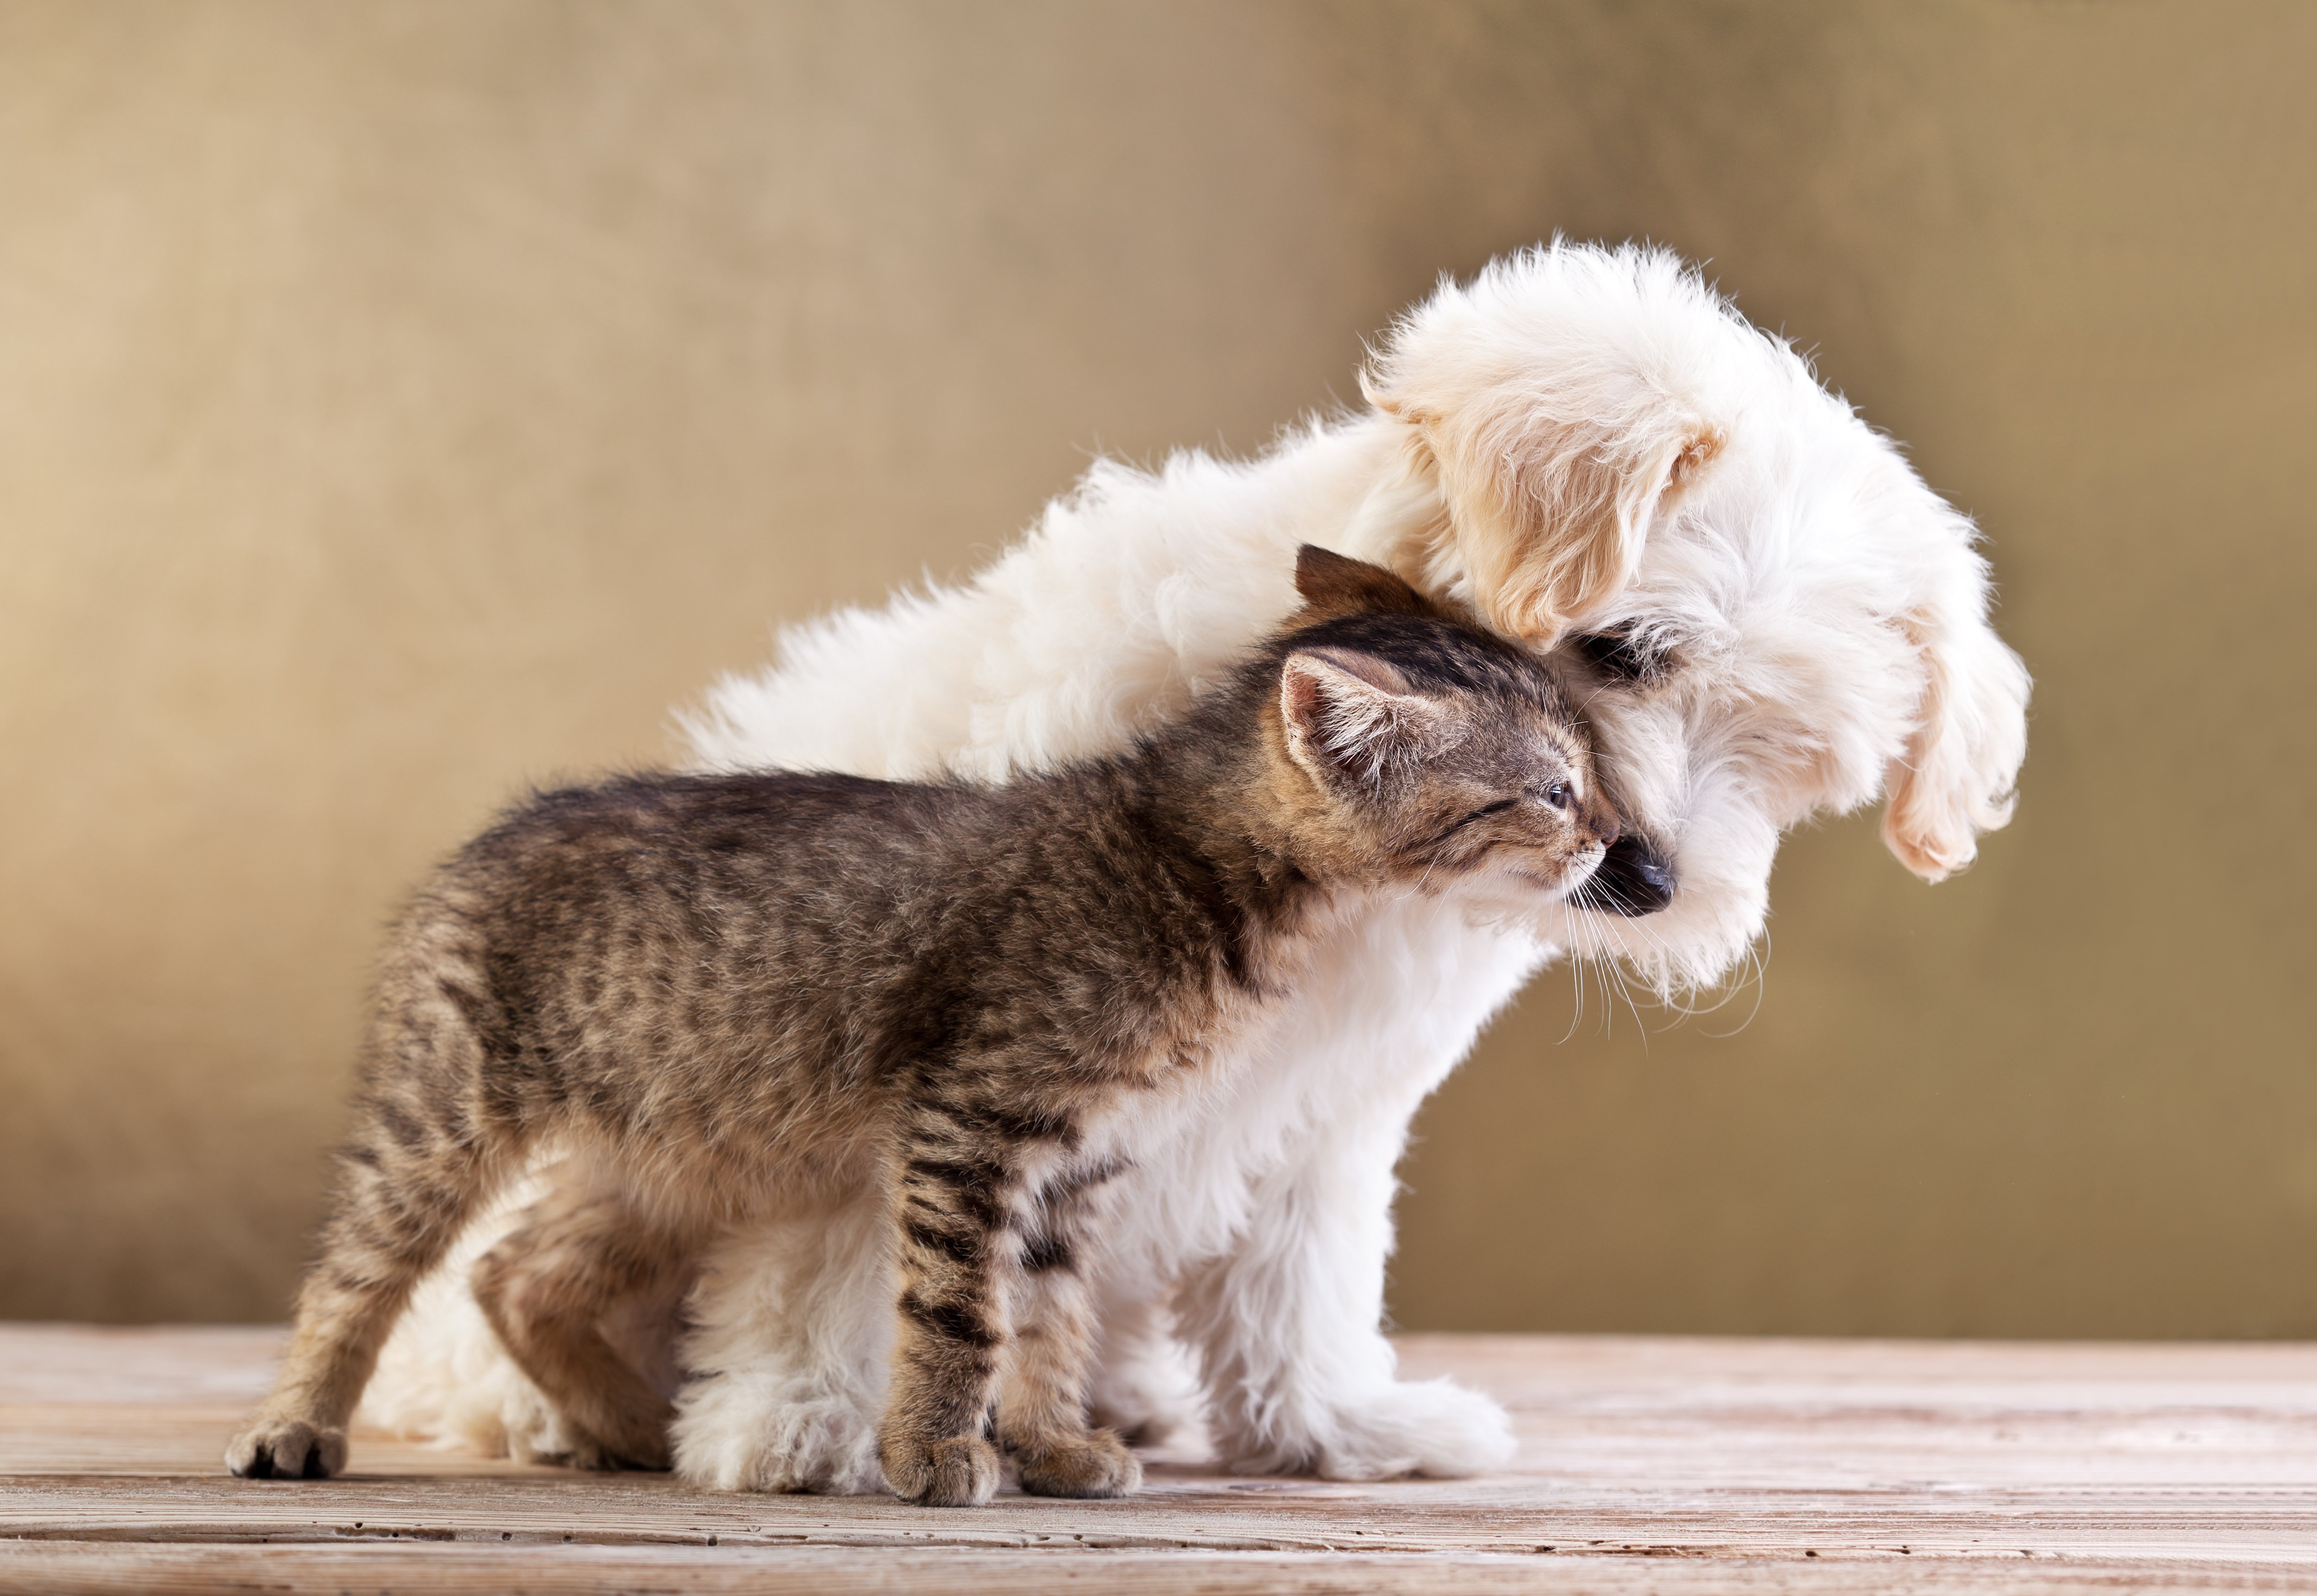 cats, Dogs, Two, Animals, Puppy, Kitten Wallpaper